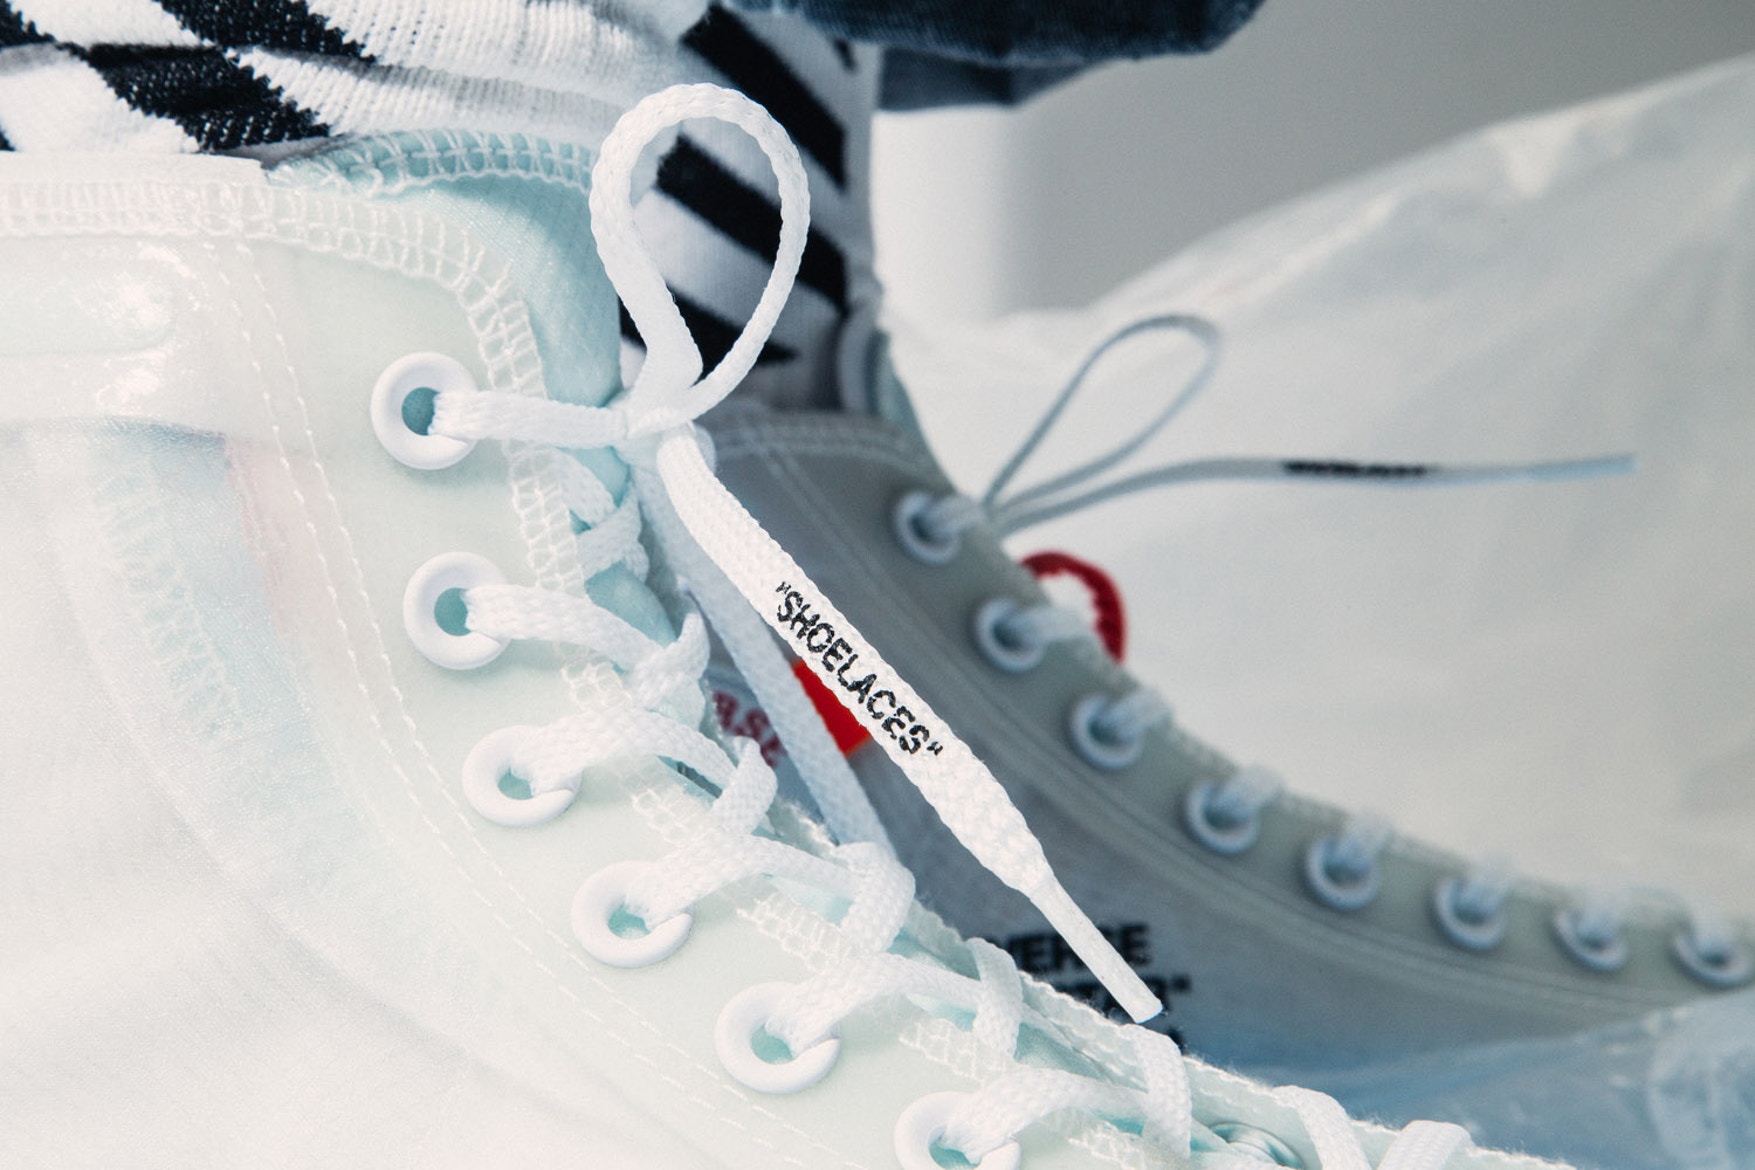 Virgil Abloh Collaborates With Converse For New Chuck 70